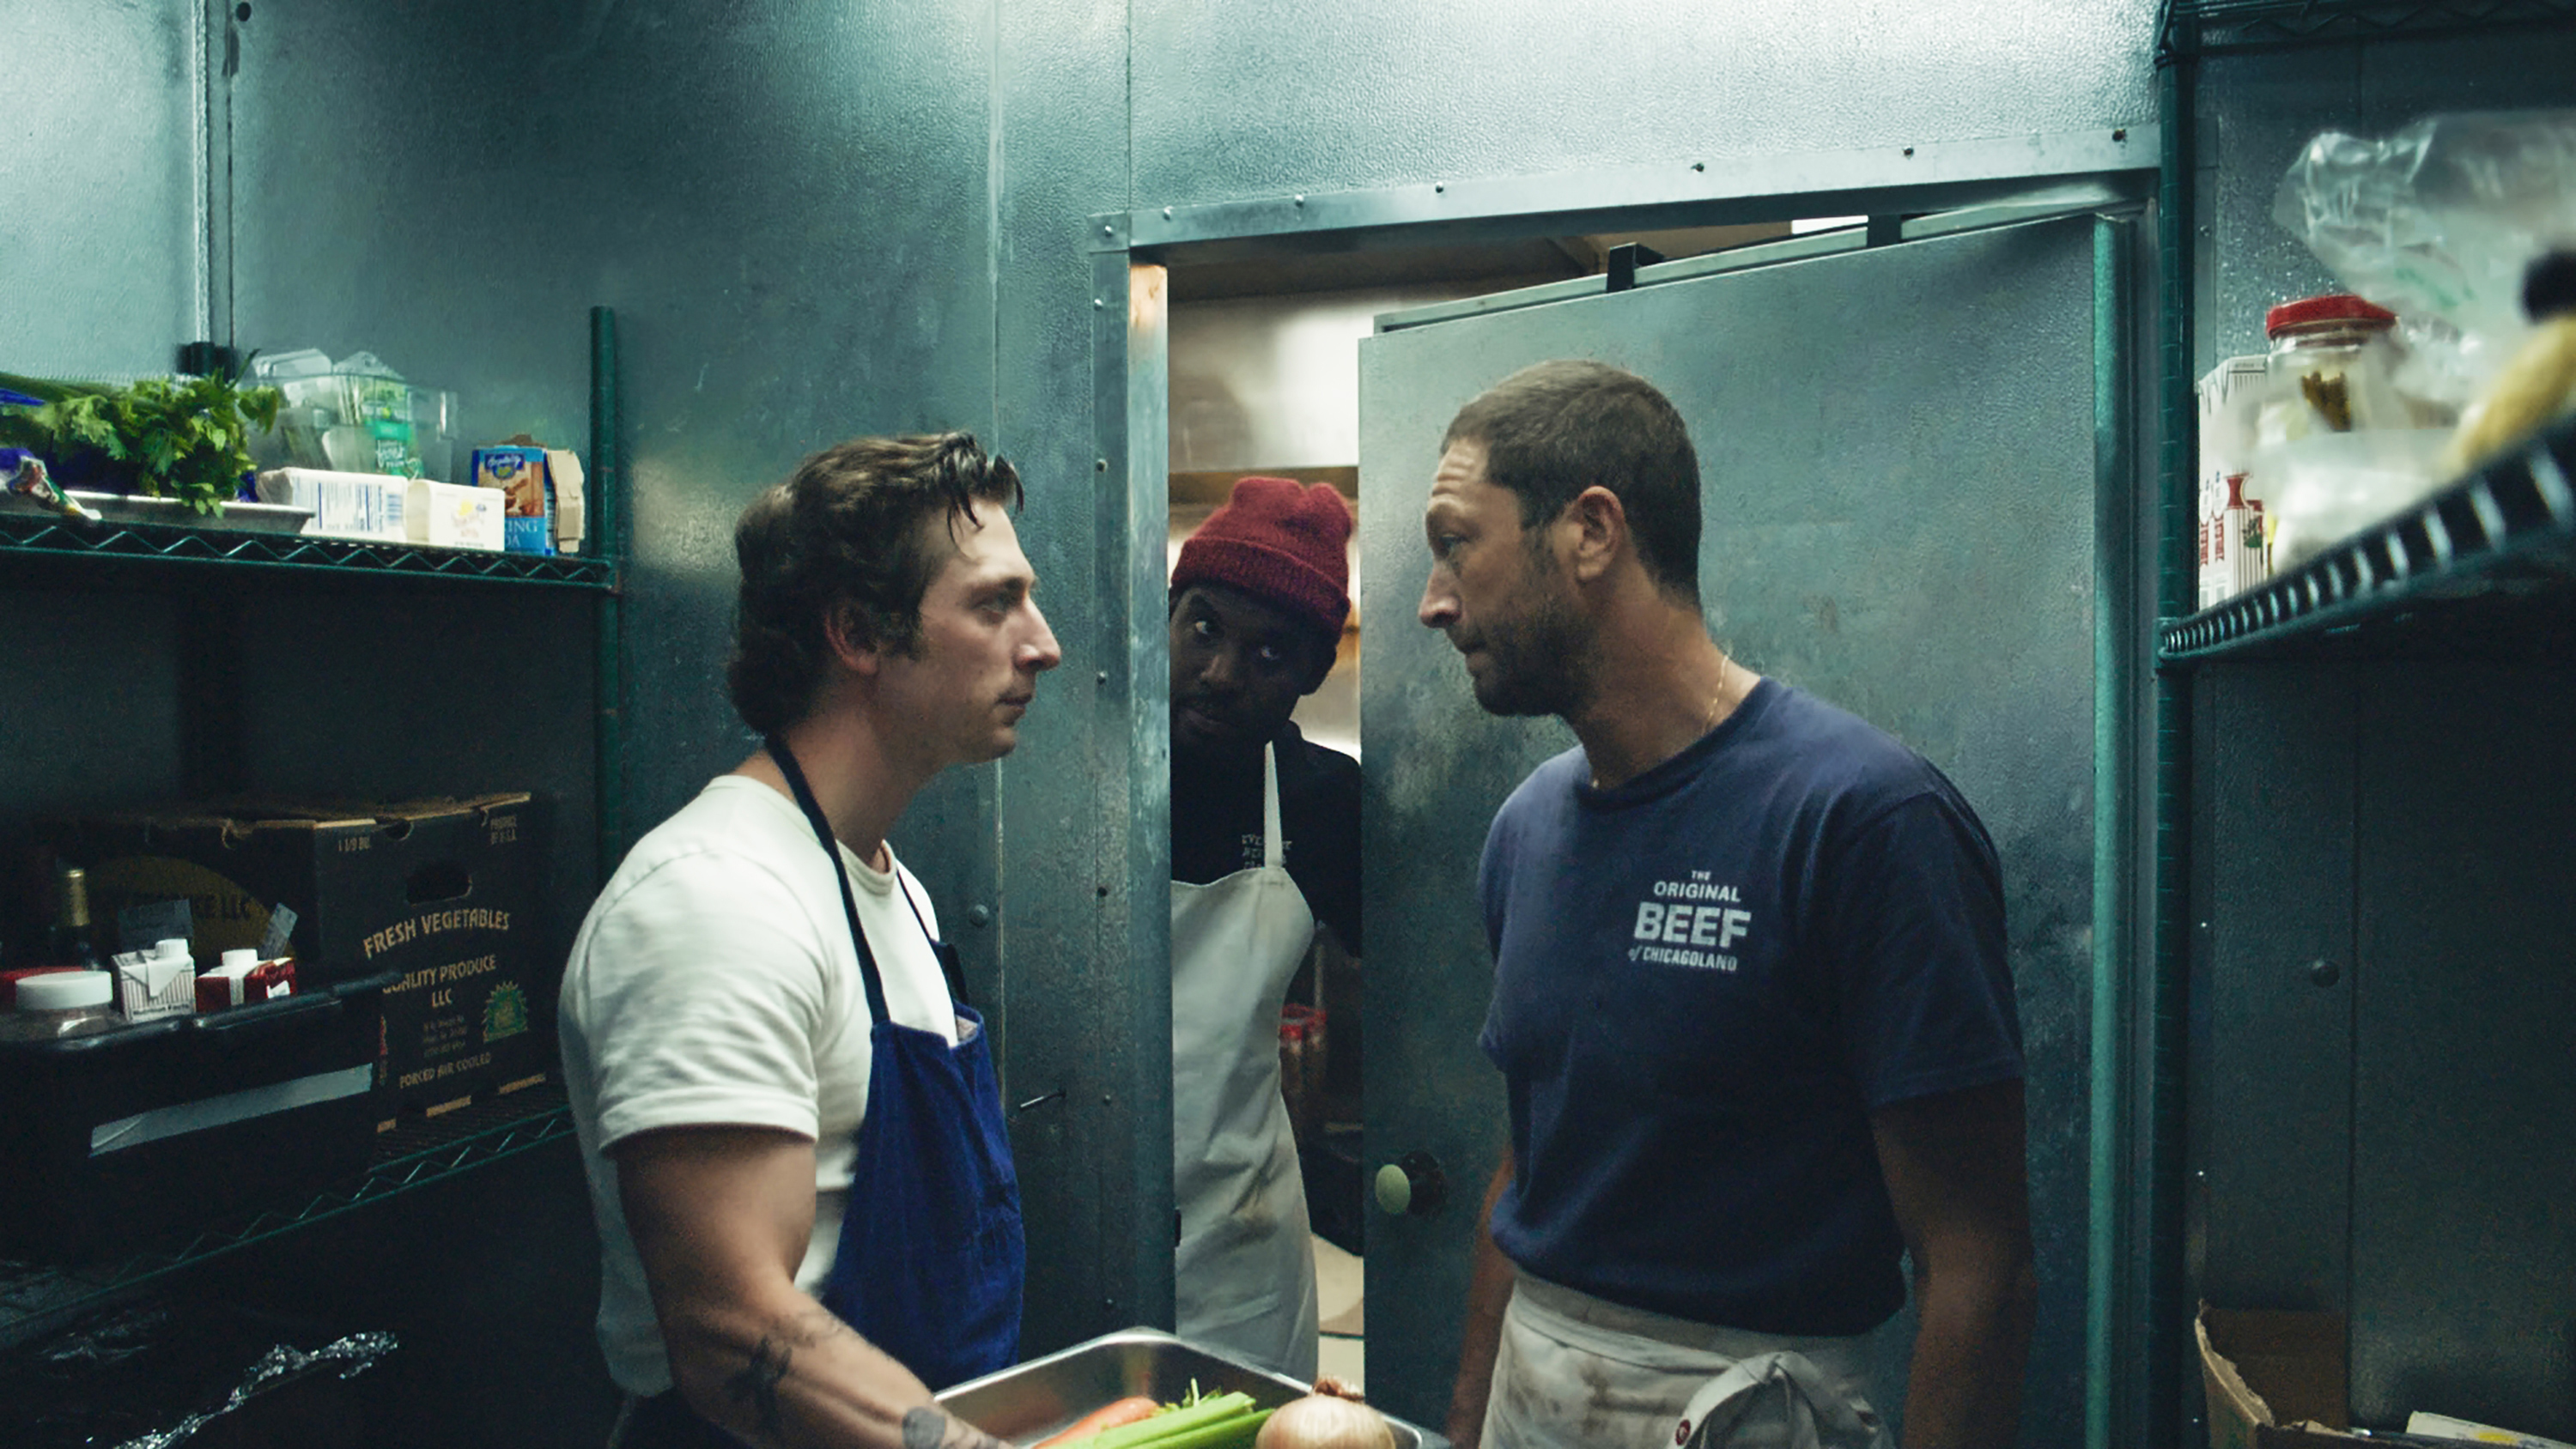 Two actors dressed as chefs square off in a kitchen.